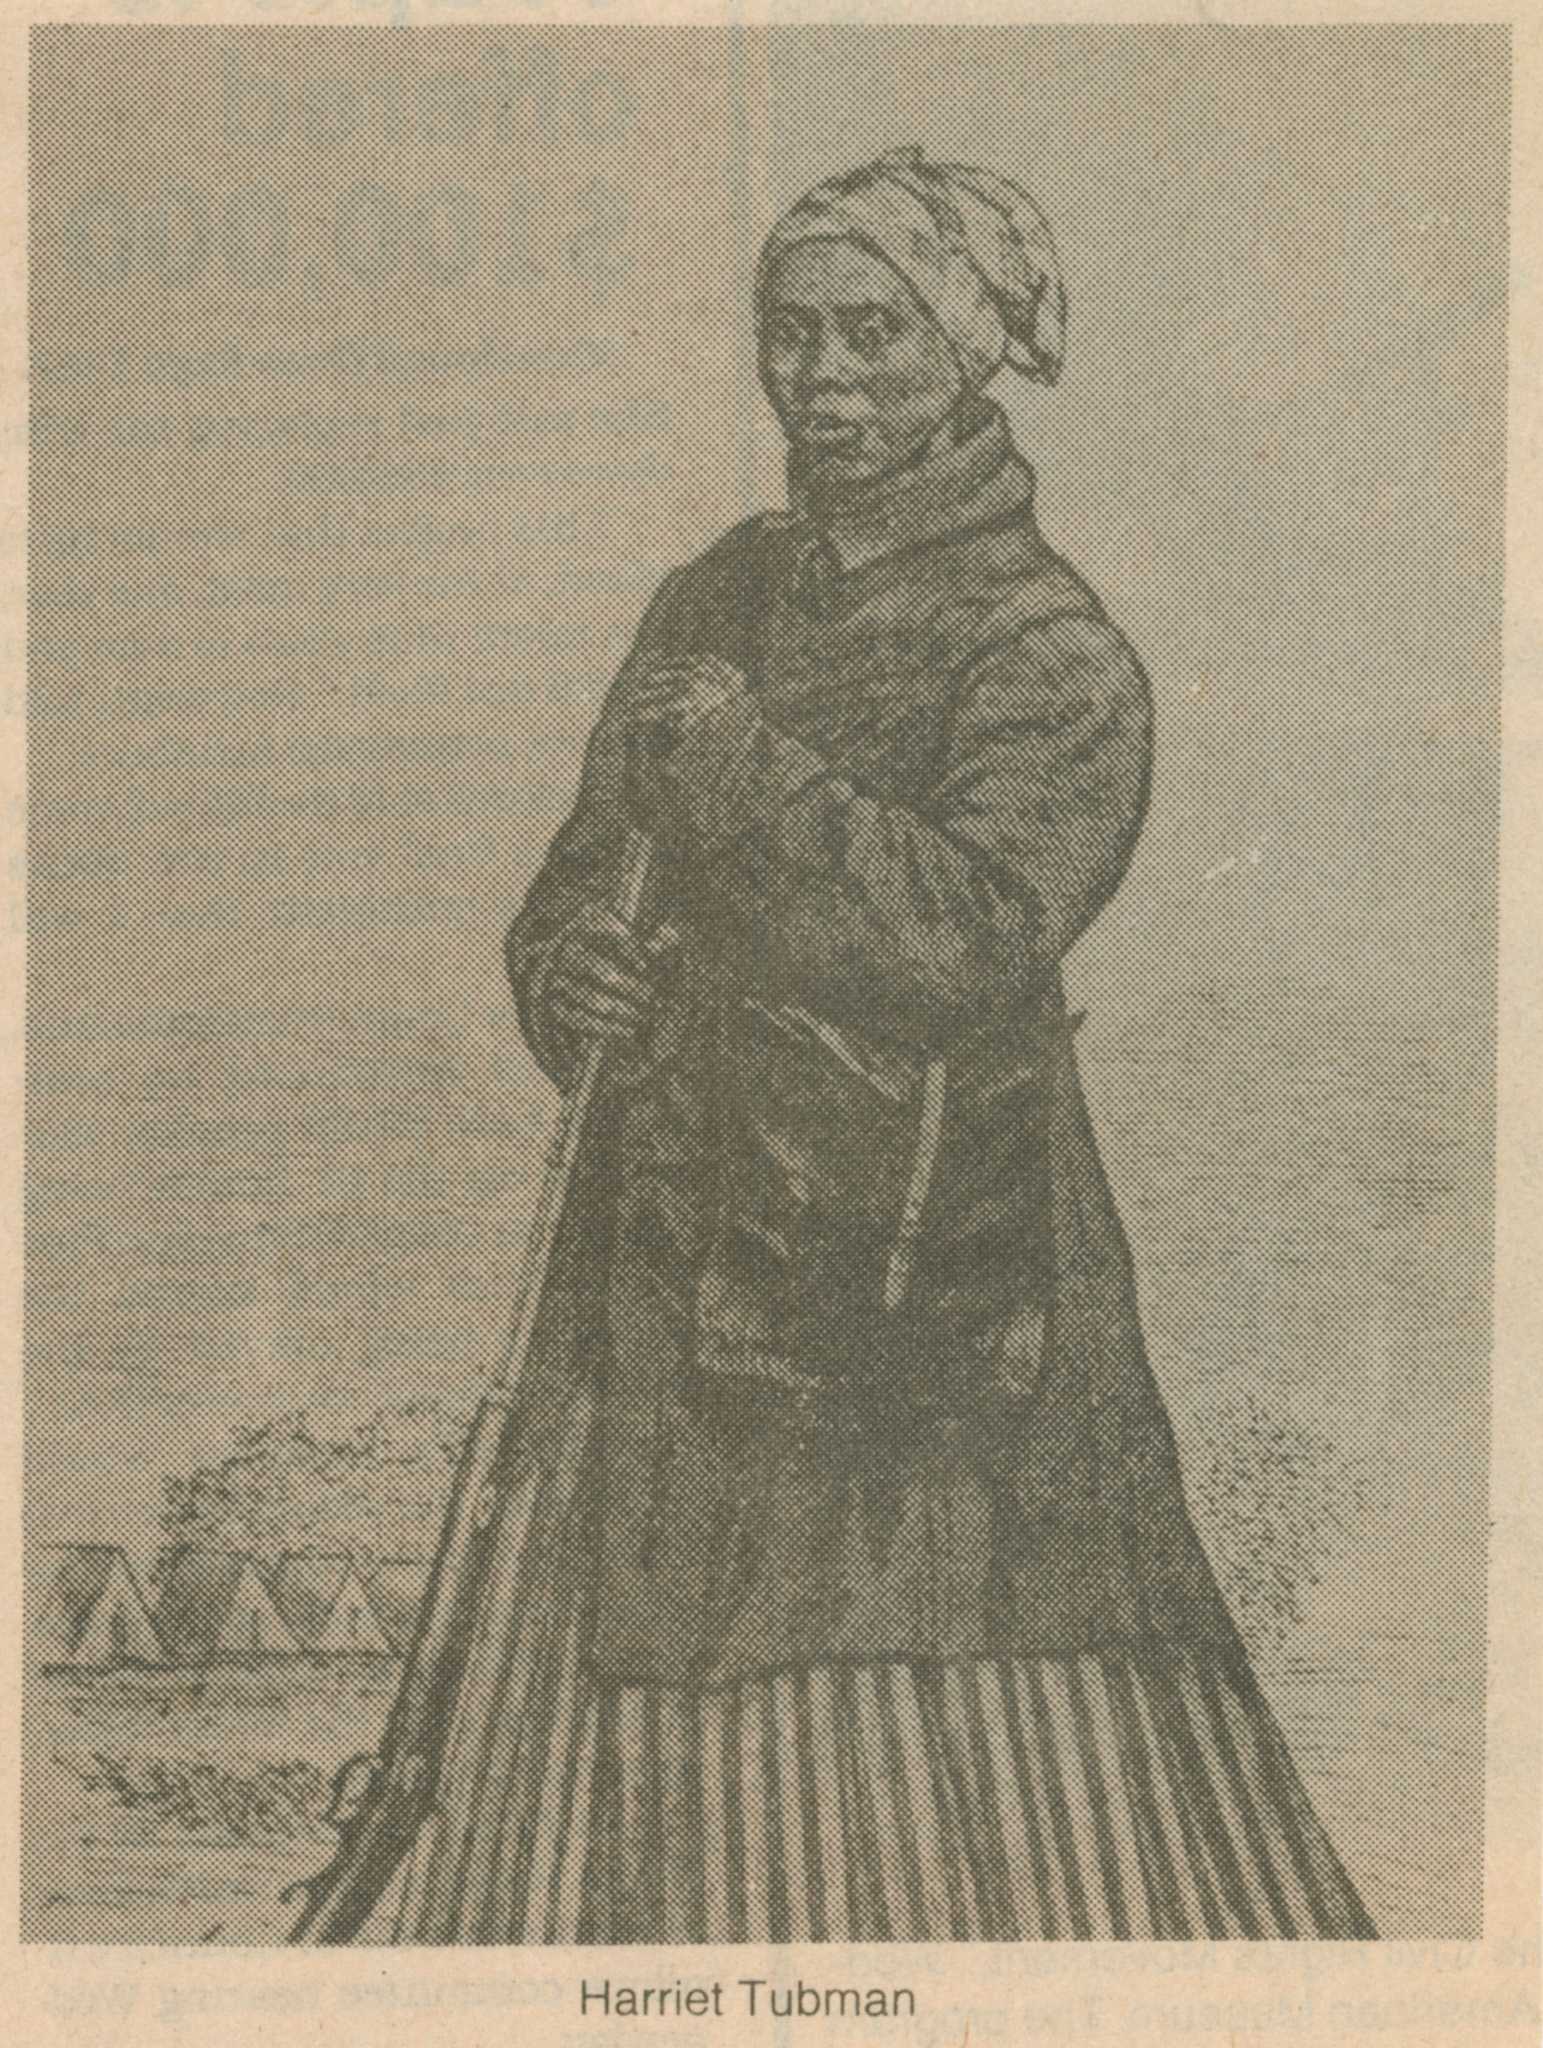 A clipping from The Philadelphia Tribune featuring a reproduction of John G. Darby's woodcut engraving portrait of Harriet Tubman. The image has been cropped from the original full-length portrait which depicts Tubman standing, holding a rifle with Civil War tents in the background. The clipping cuts off the portrait just above the feet. Above is the first two columns of the accompanying article with the headline "Spoken history: / Harriet Tubman" and beneath is the caption [Harriet Tubman]. The clipping refers to a Women's History Month program at the African American Museum in Philadelphia featuring Tubman's great-grandniece Mariline Wilkins. The date and source are printed across the top [Friday, March 21, 1986 The Philadelphia Tribune].